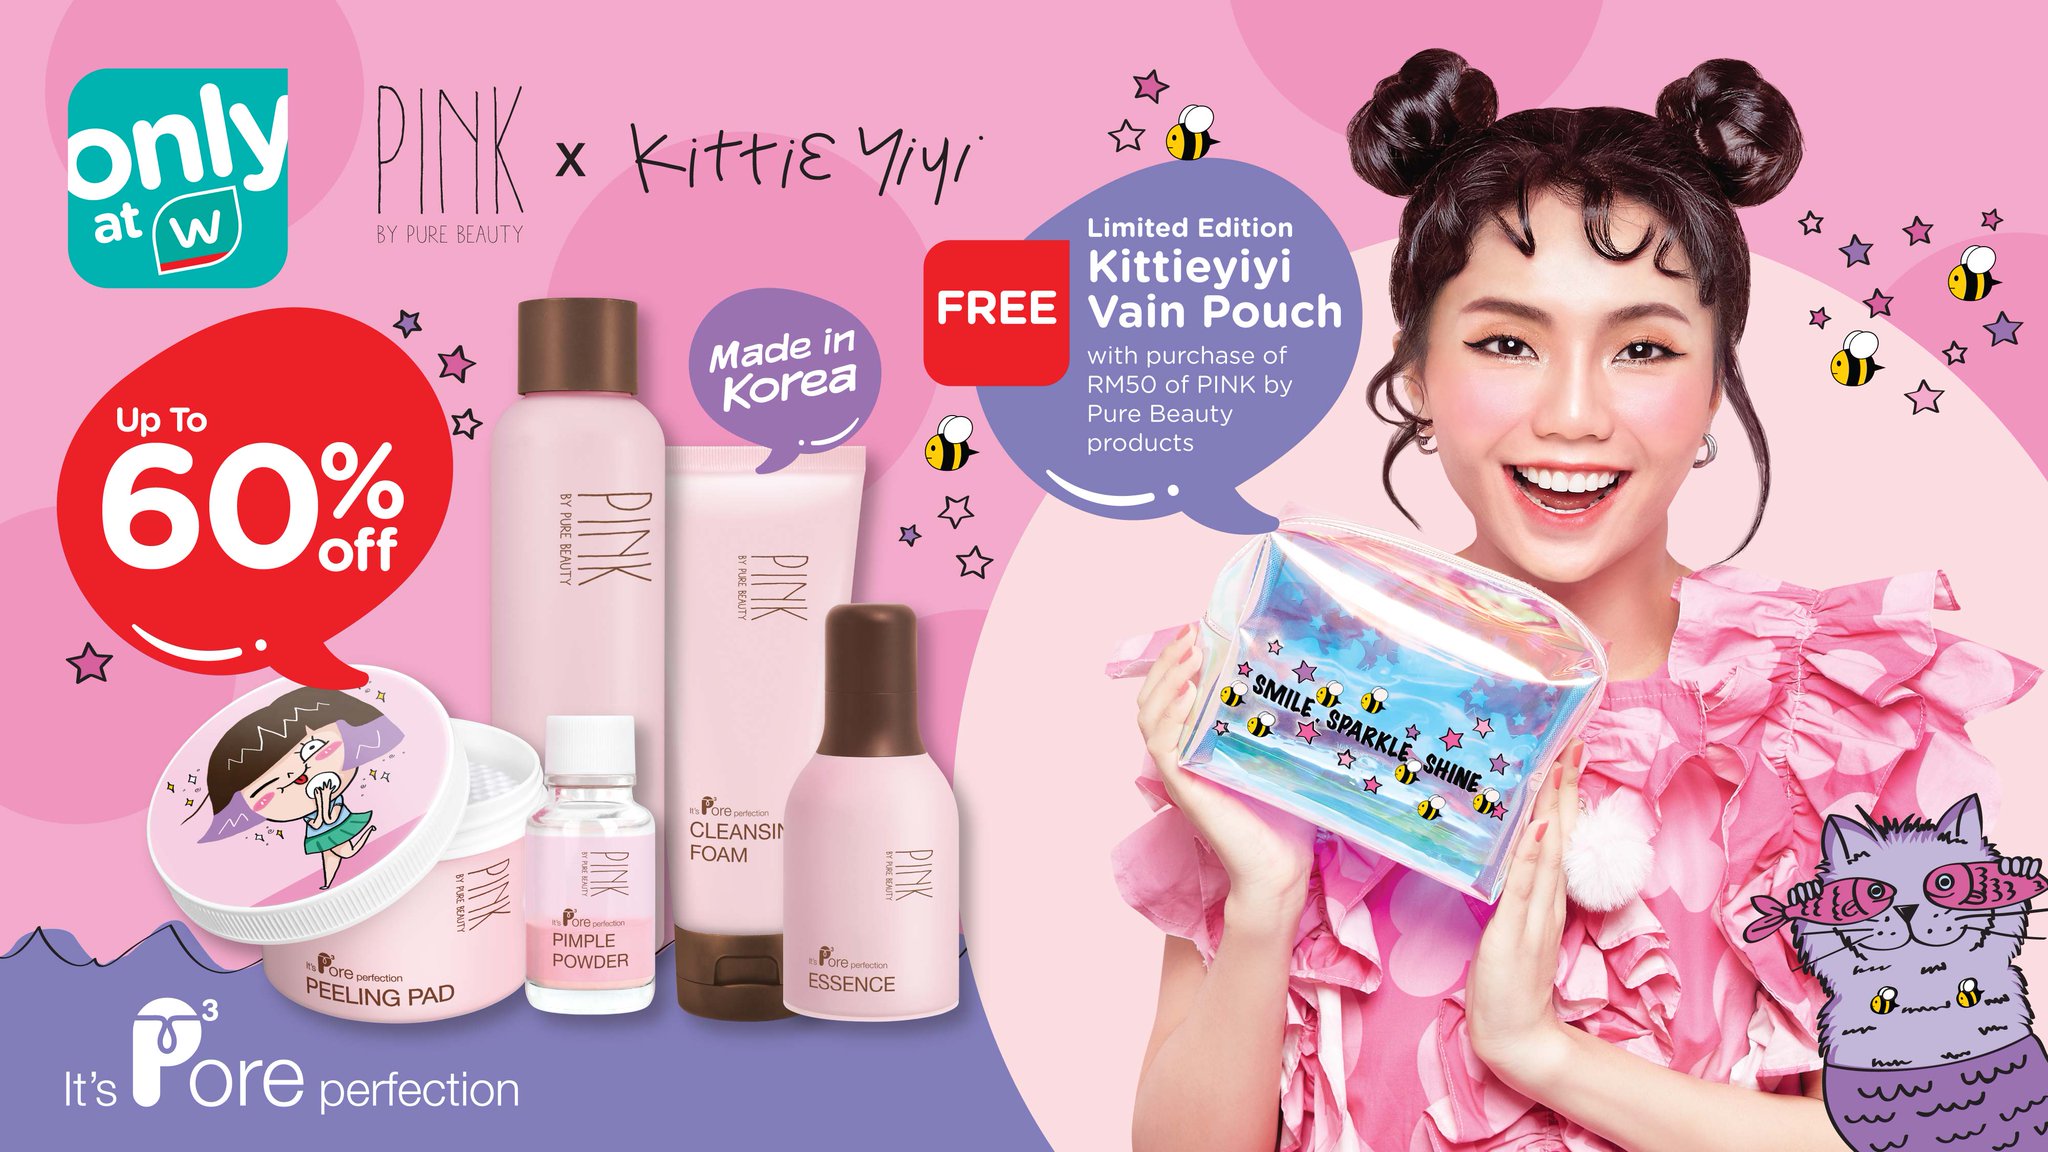 Watsons Malaysia On Twitter Only At Watsons Grab Your Favourite Pink By Pure Beauty It S Pore Perfection Range At The Nearest Watsons Store Or Online Today Https T Co Pdzezglnxn Enjoy Up To